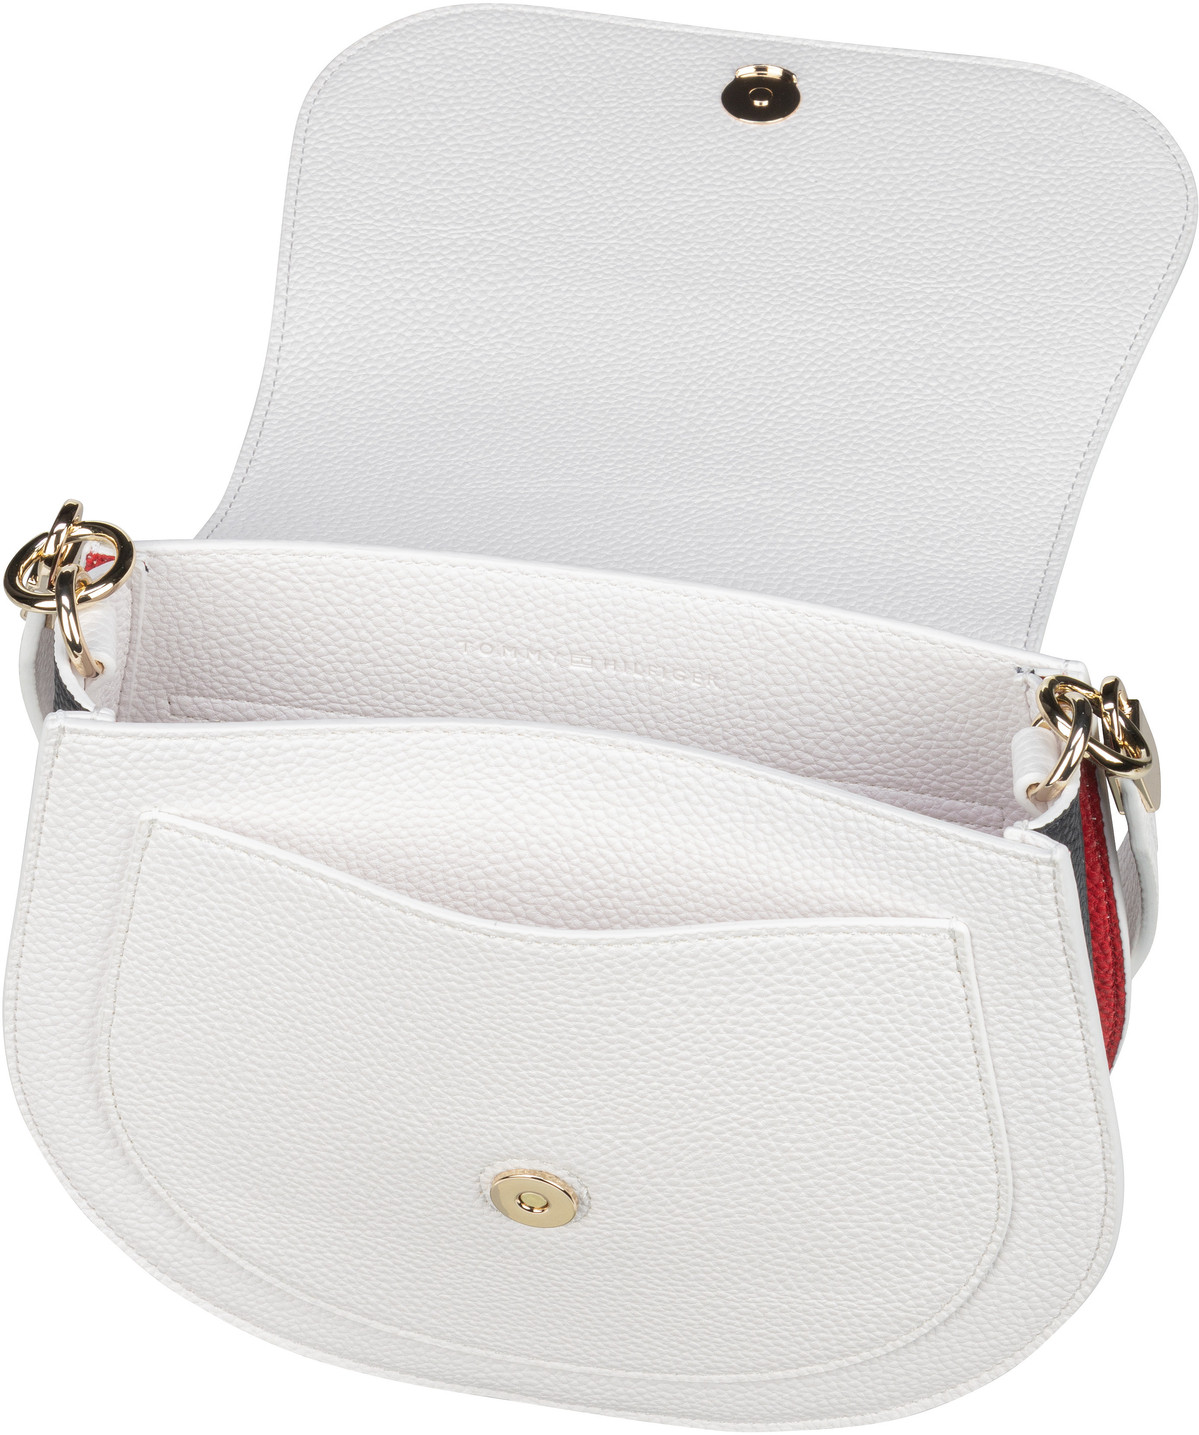 Tommy Hilfiger TH Element Saddle Bag Corp SP22 - White Corporate